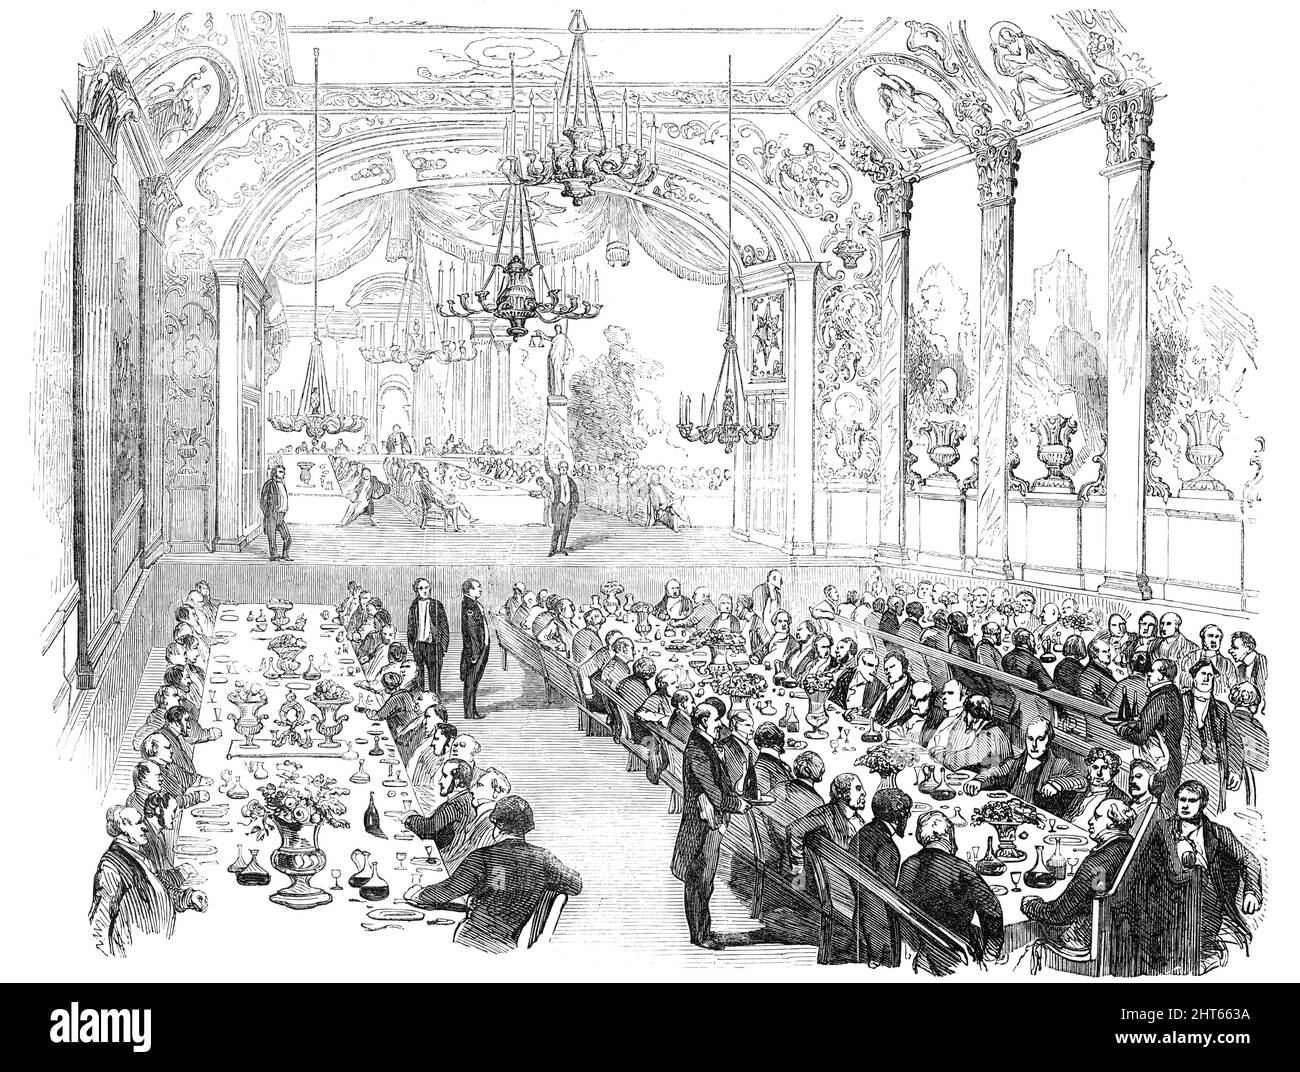 Reform Banquet in the Theatre, Wellington, New Zealand, 1850. 'Nearly two hundred guests sat down to a sumptuous dinner...On the stage was the chairman's table, from which three tables extended...towards the footlights...The stage was embellished with flags, evergreens, &amp;c. A new scene, painted by Mr. Marriott, expressly for the occasion, tapestried the wall behind the chair; representing a Roman arch, flanked by columns, and surmounted by figures of Justice and Victory. The whole of the theatre and the staircase leading to the stage were hung with chandeliers of lights, whose brilliance s Stock Photo